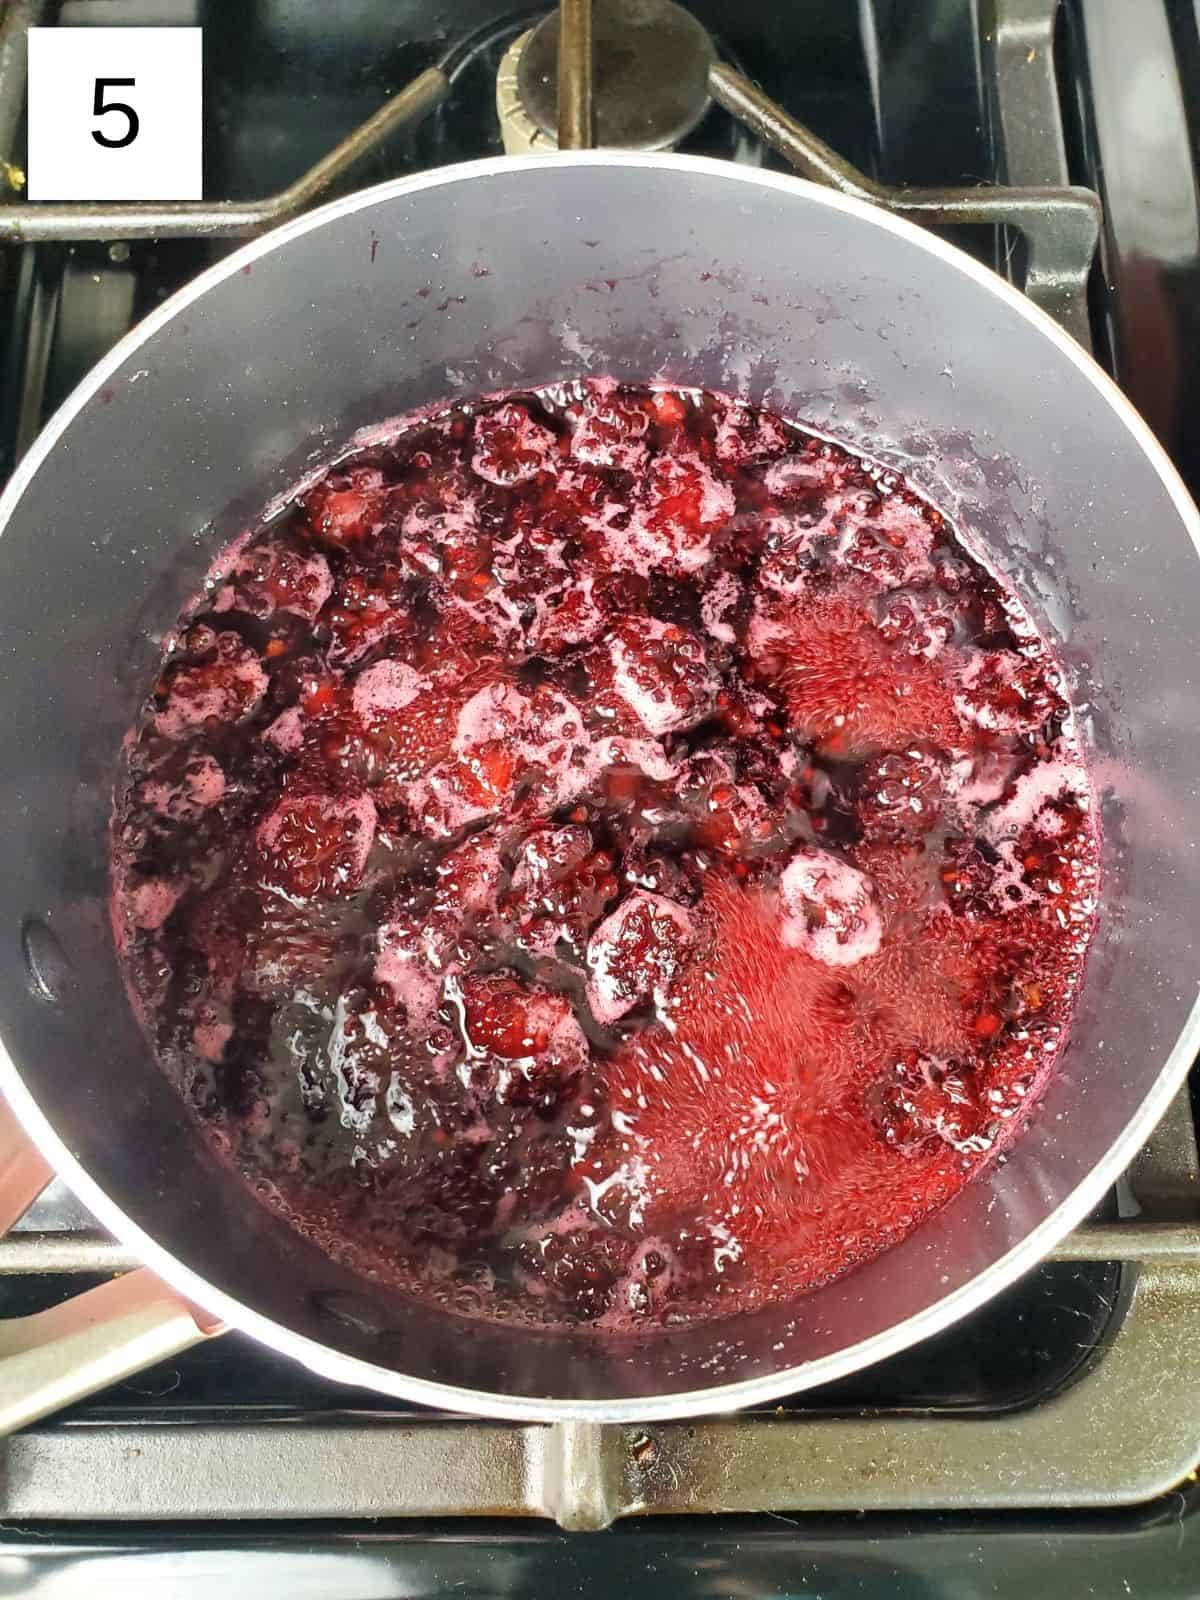 a saucepan of sweetened and pulverized blackberries.